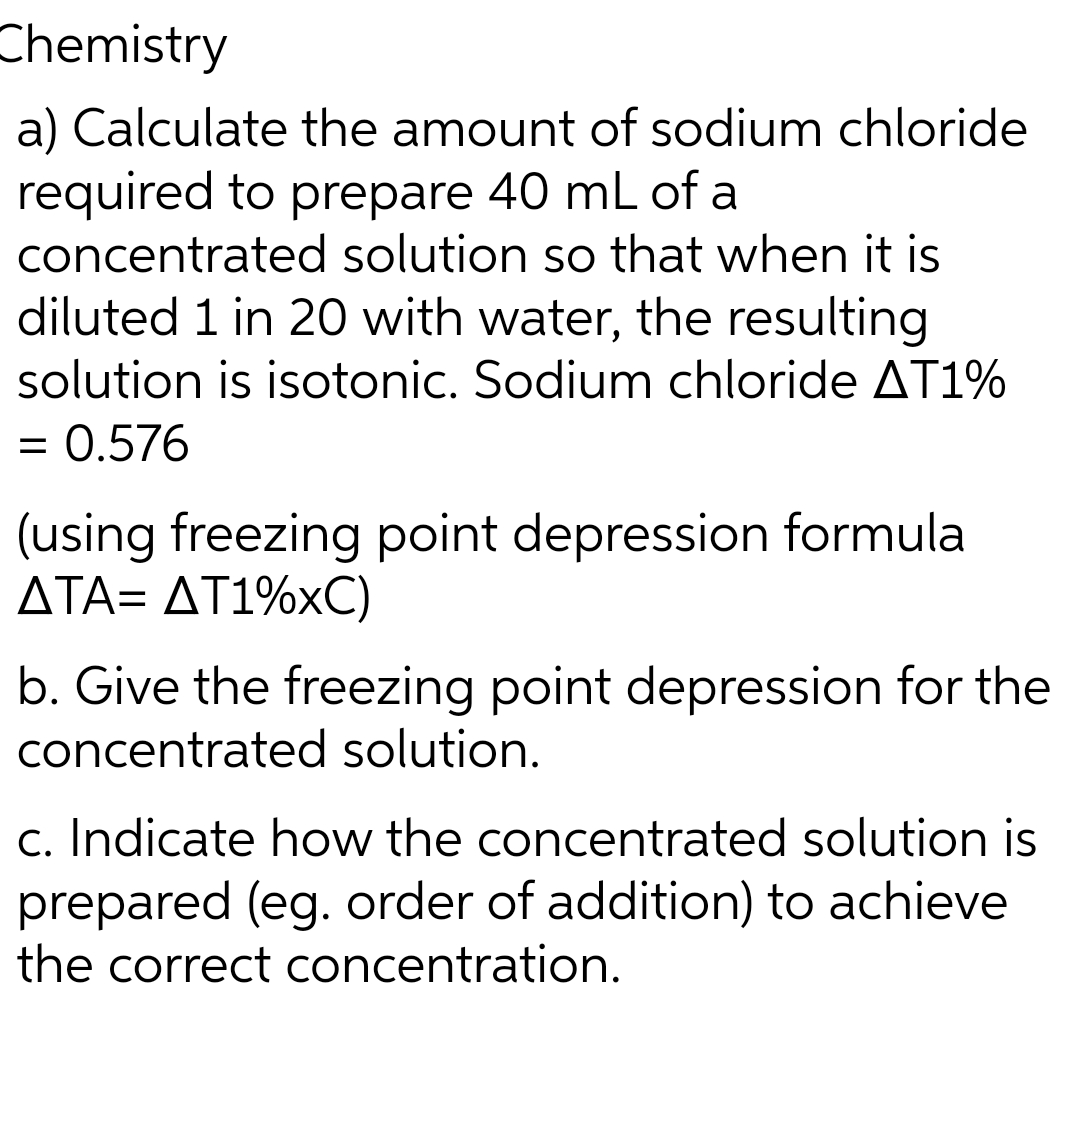 Chemistry
a) Calculate the amount of sodium chloride
required to prepare 40 mL of a
concentrated solution so that when it is
diluted 1 in 20 with water, the resulting
solution is isotonic. Sodium chloride AT1%
= 0.576
(using freezing point depression formula
ATA= AT1%xC)
b. Give the freezing point depression for the
concentrated solution.
c. Indicate how the concentrated solution is
prepared (eg. order of addition) to achieve
the correct concentration.
